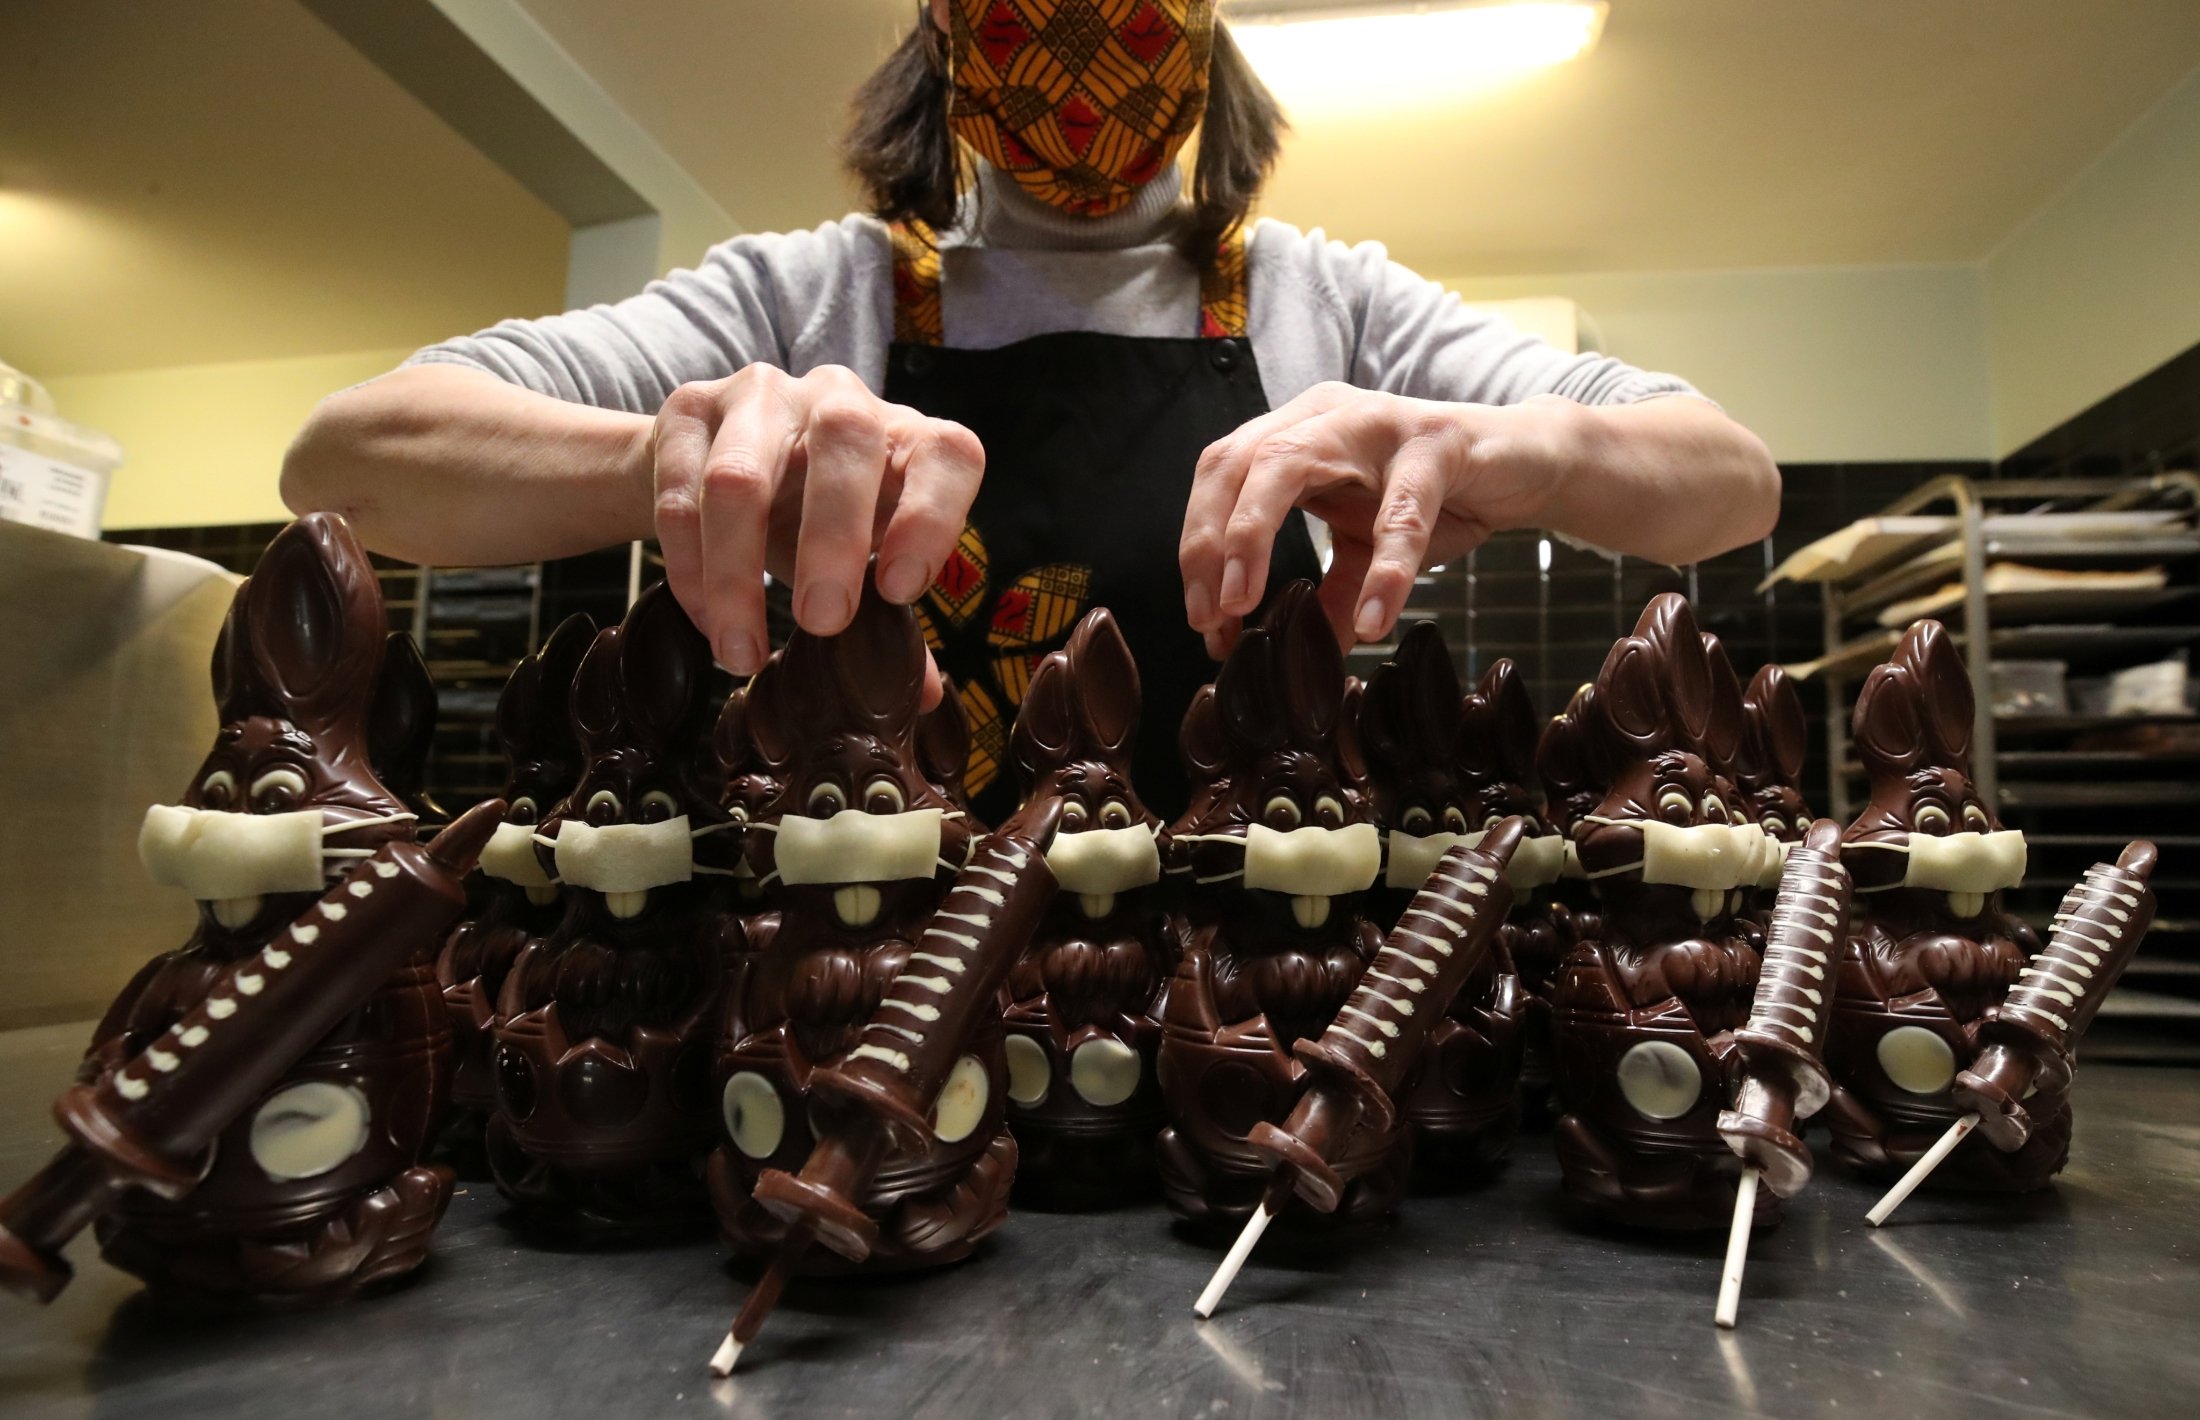 Belgian artisan chocolate maker Genevieve Trepant works on her chocolate bunnies wearing protective masks and holding vaccine syringes called "L